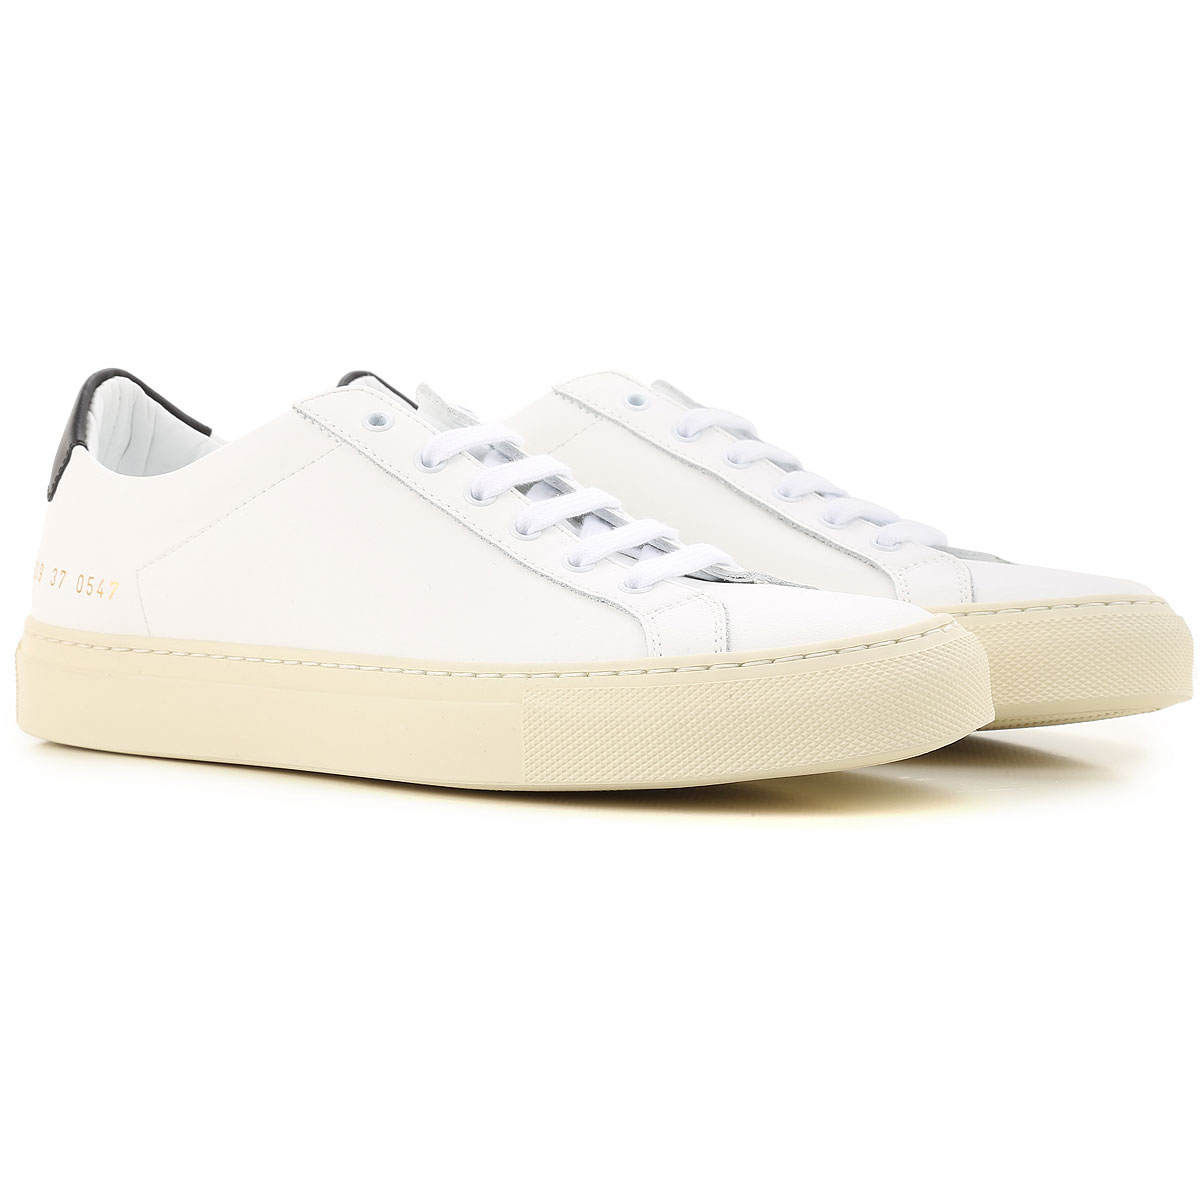 Womens Shoes Woman by Common Projects, Style code: 3839-0547-